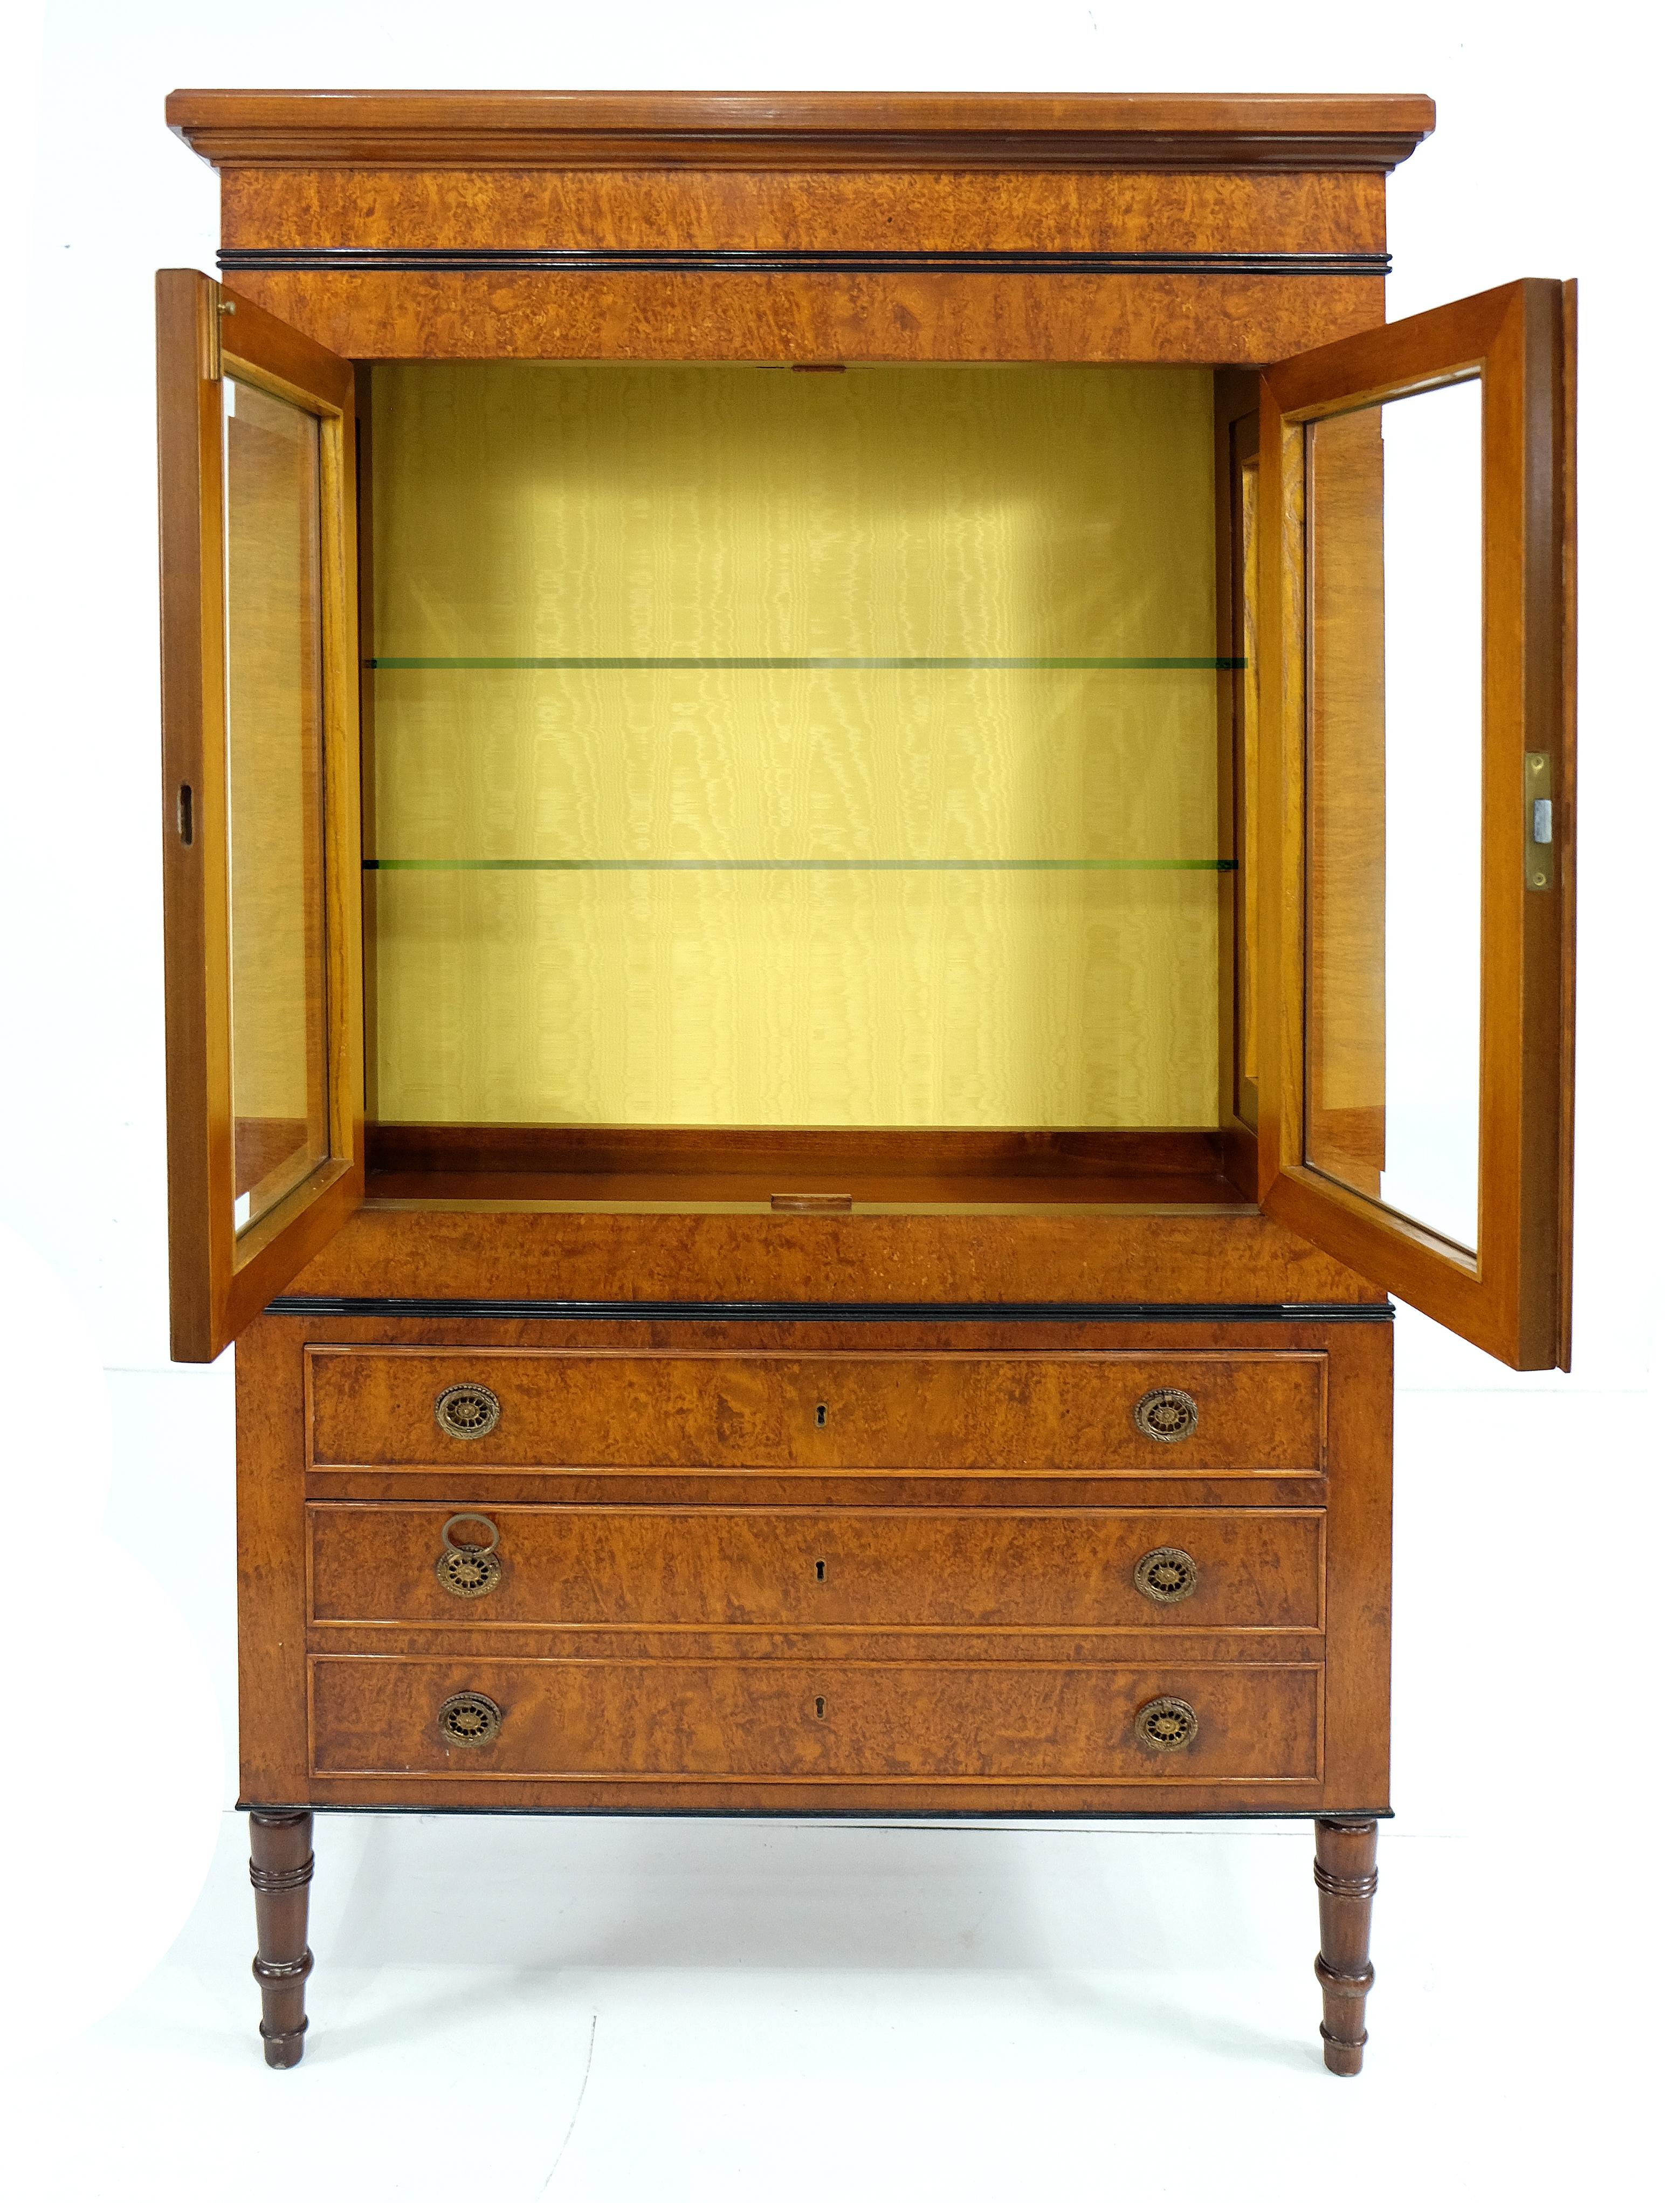 Rho Mobili D' Epoca Neoclassical Style Vitrine on Chest, Italy

Offered for sale is a neoclassical style vitrine with glass shelves and drawers below from Rho Mobili D' Epoca of Italy. This fine quality
vitrine on chest is an assembled two-piece